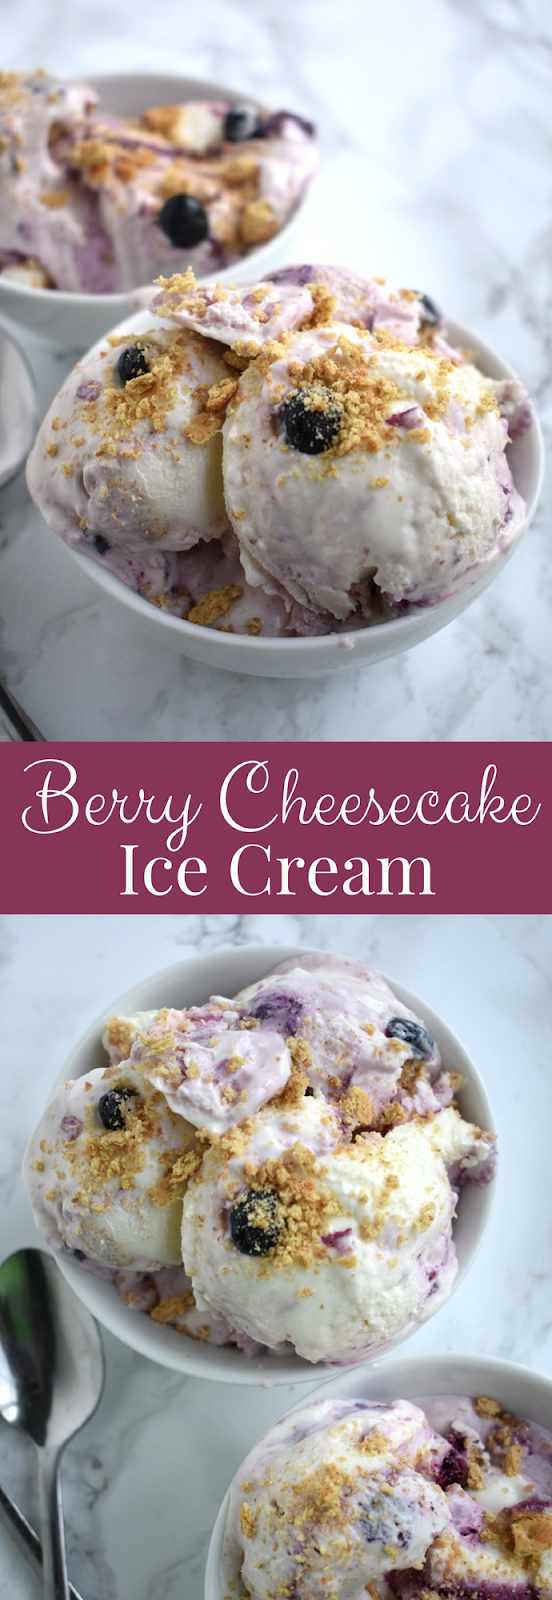 Berry Cheesecake Ice Cream is a healthier frozen yogurt with just 5 ingredients, is packed full of protein with Greek yogurt and tastes like an indulgent dessert with rich cream cheese, berries and graham crackers. www.nutritionistreviews.com